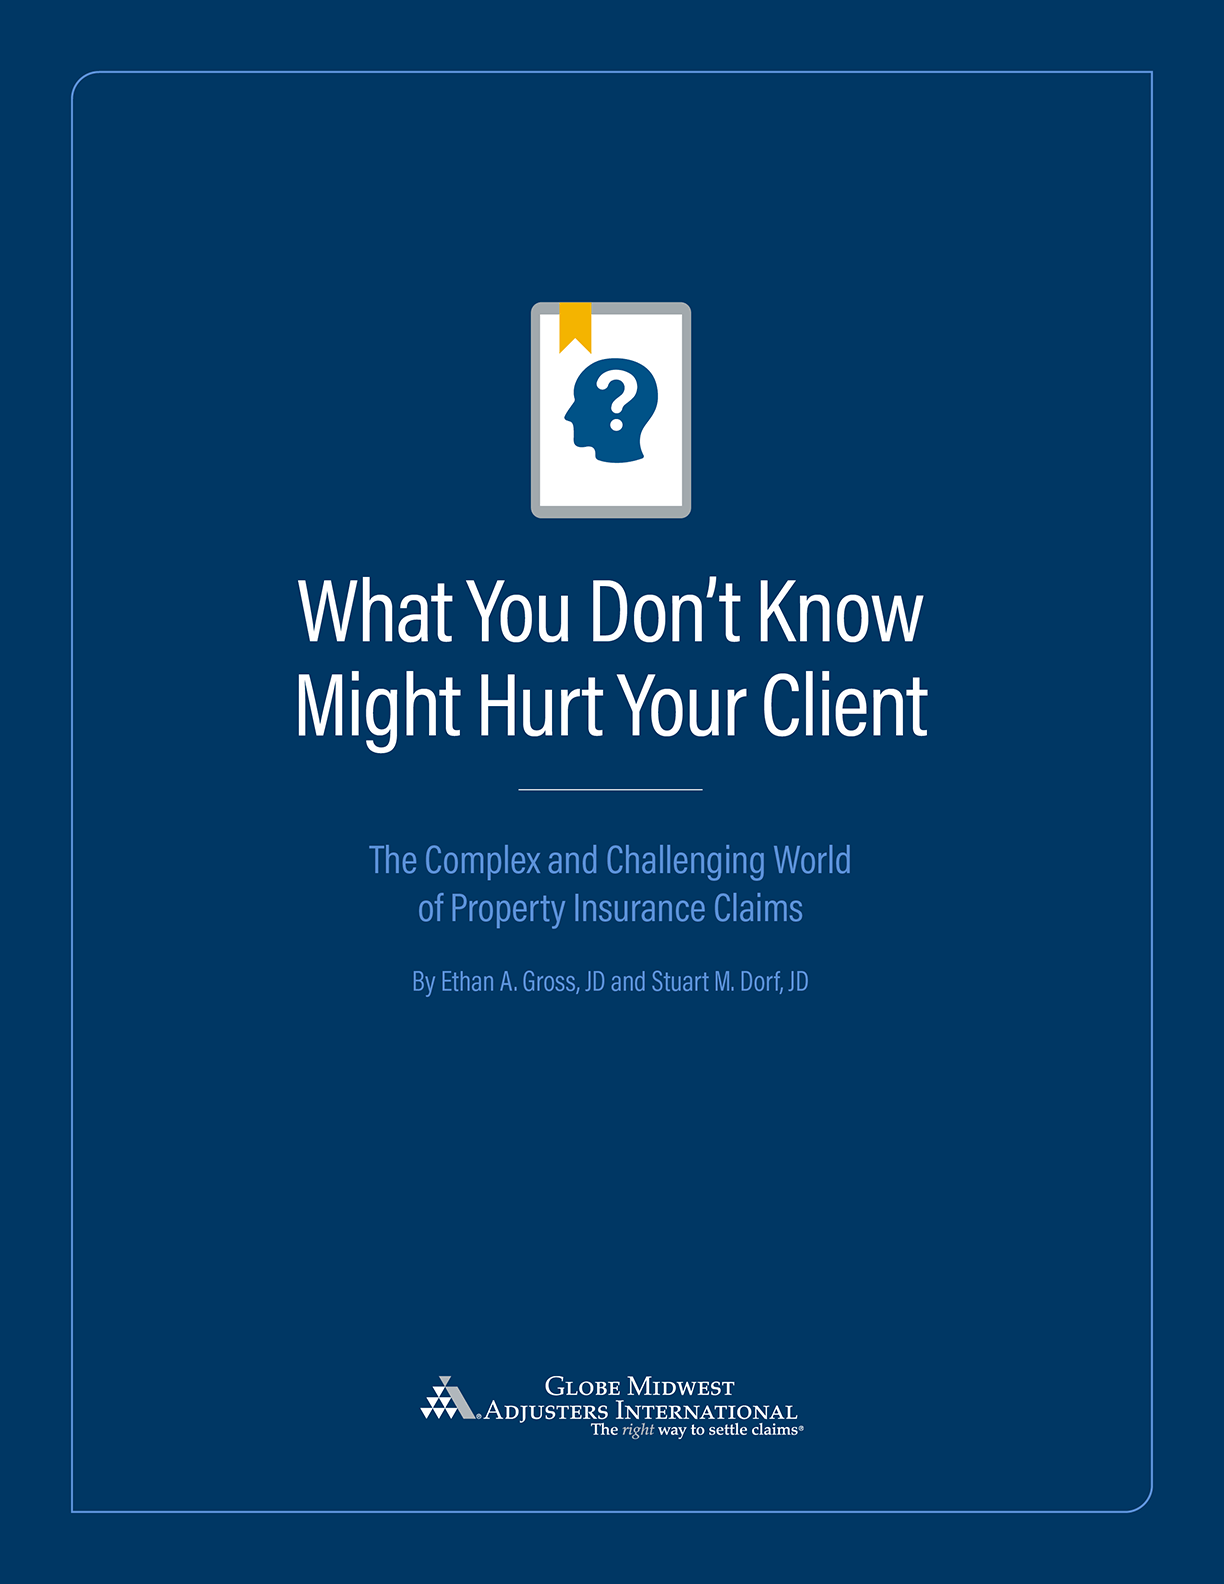 What You Don't Know Might Hurt Your Client